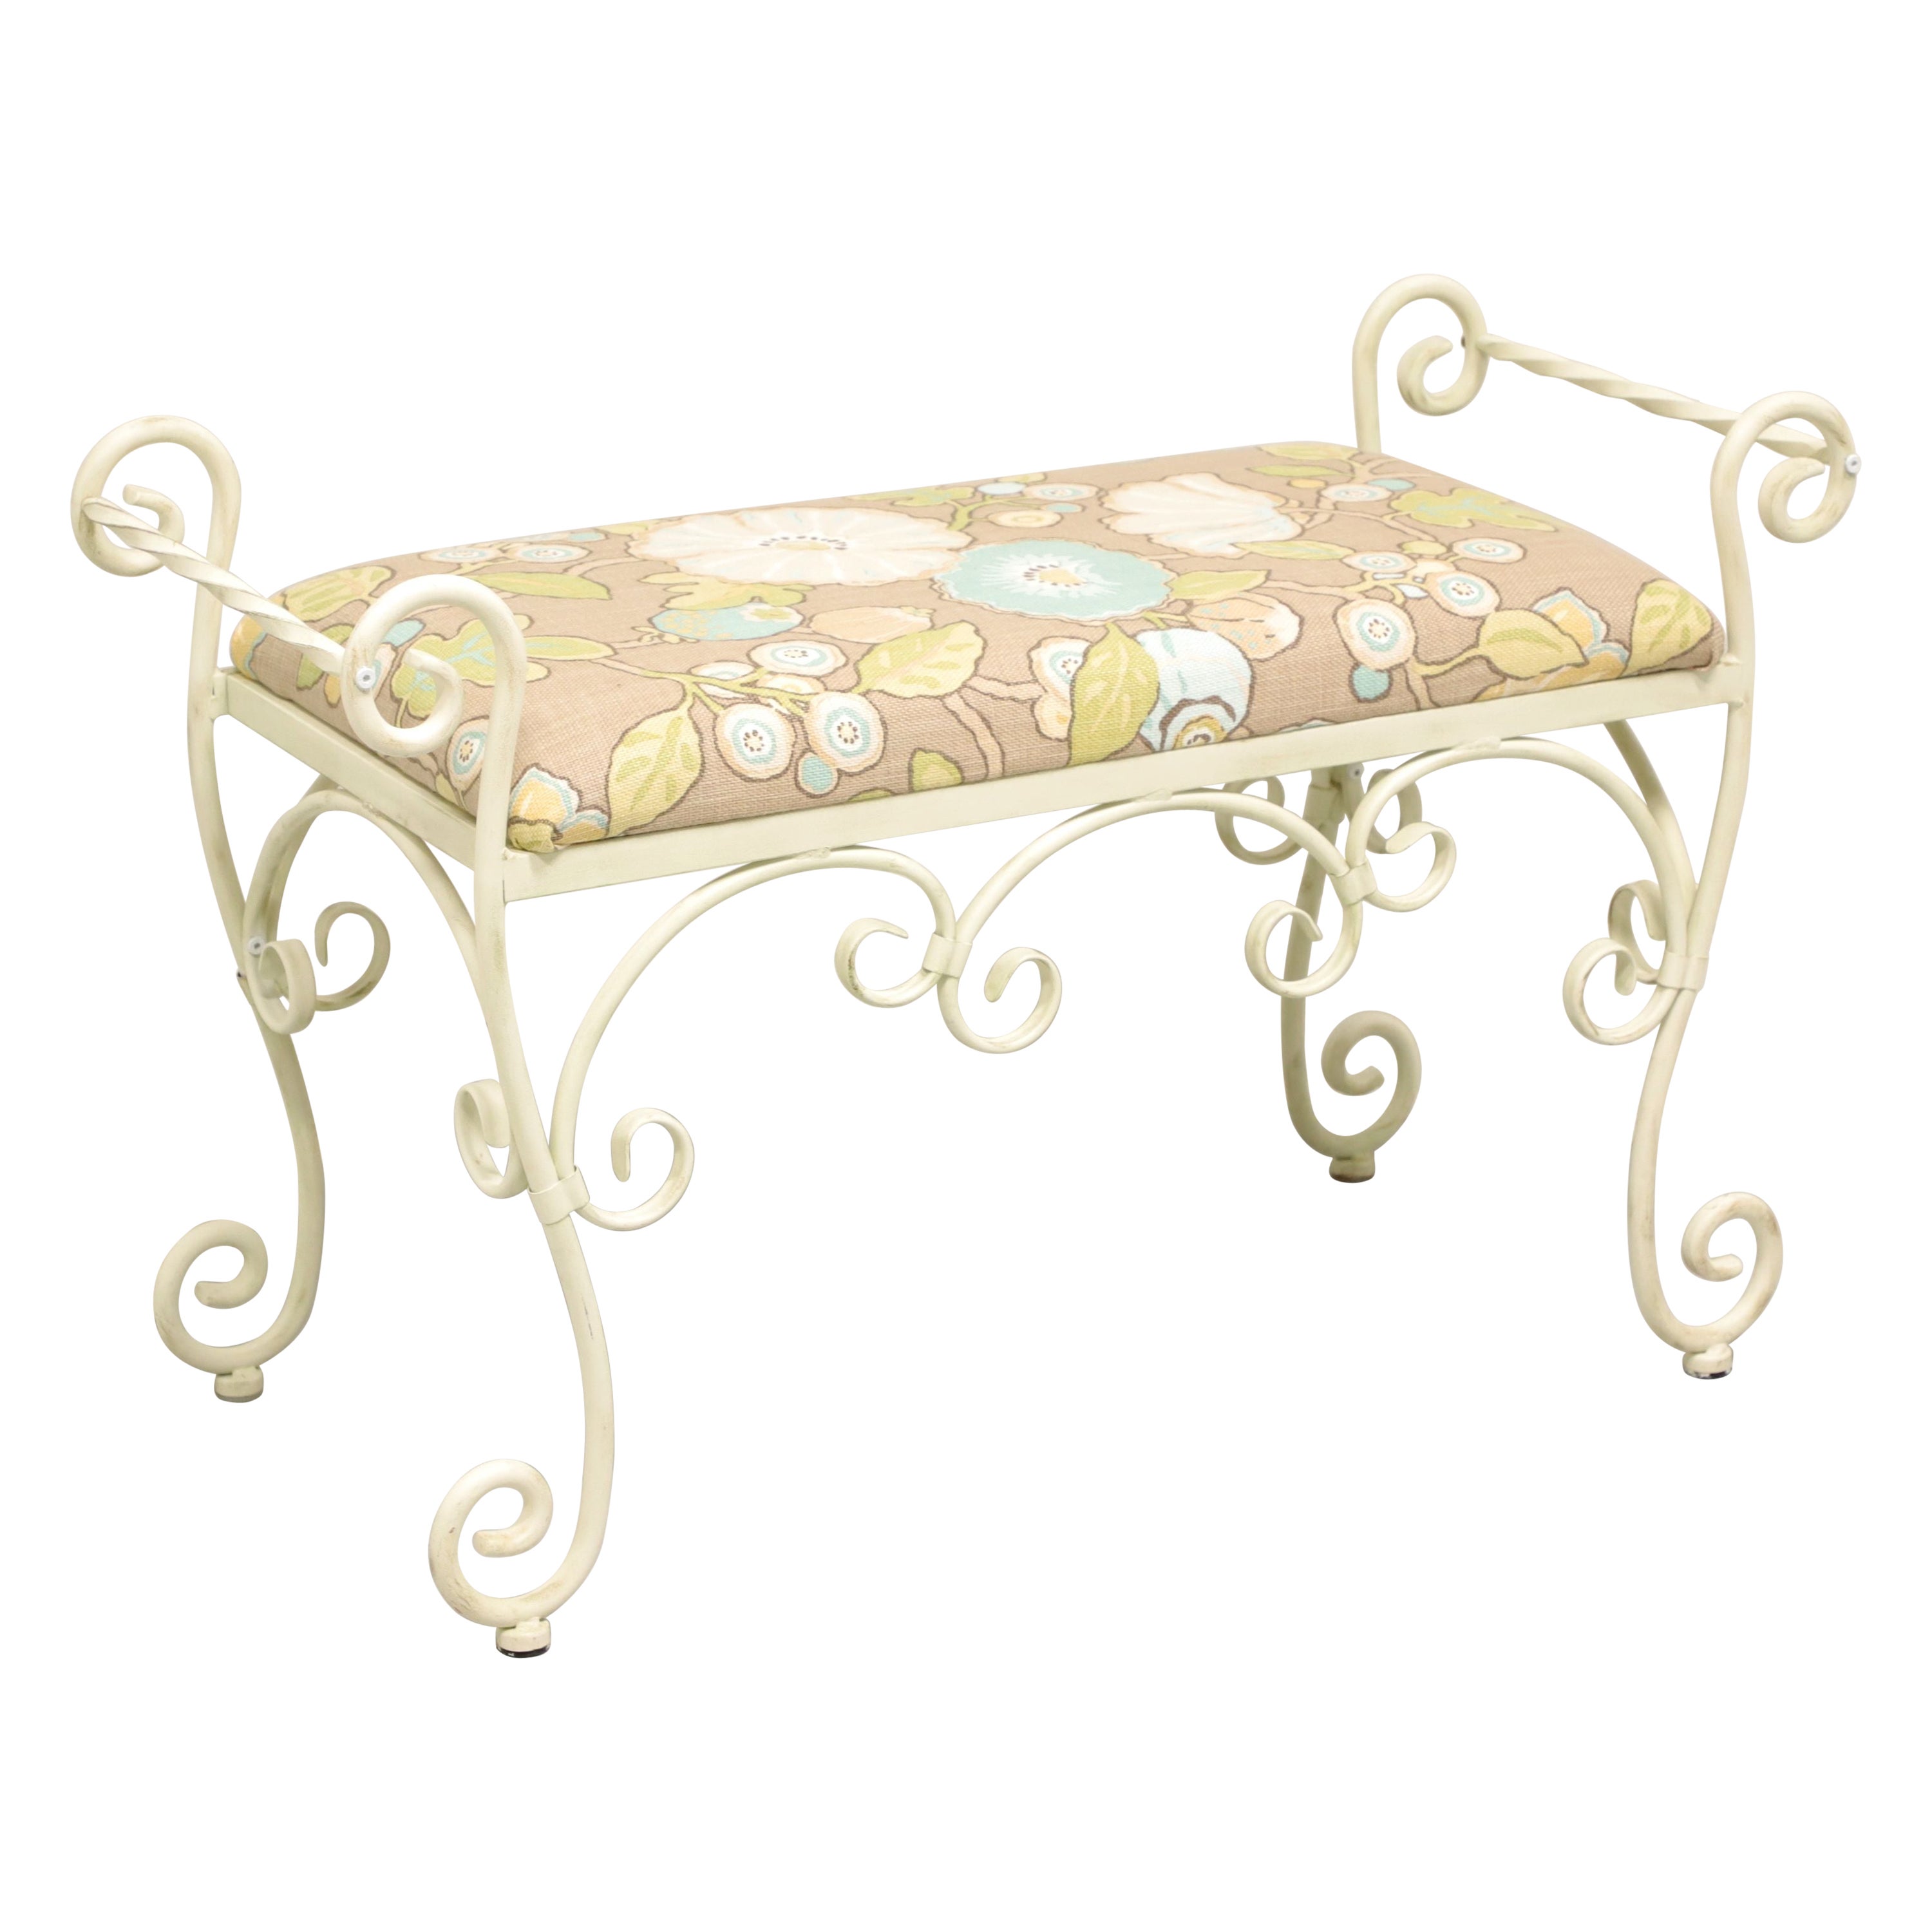 Vintage Wrought Iron White Painted Vanity Bench For Sale